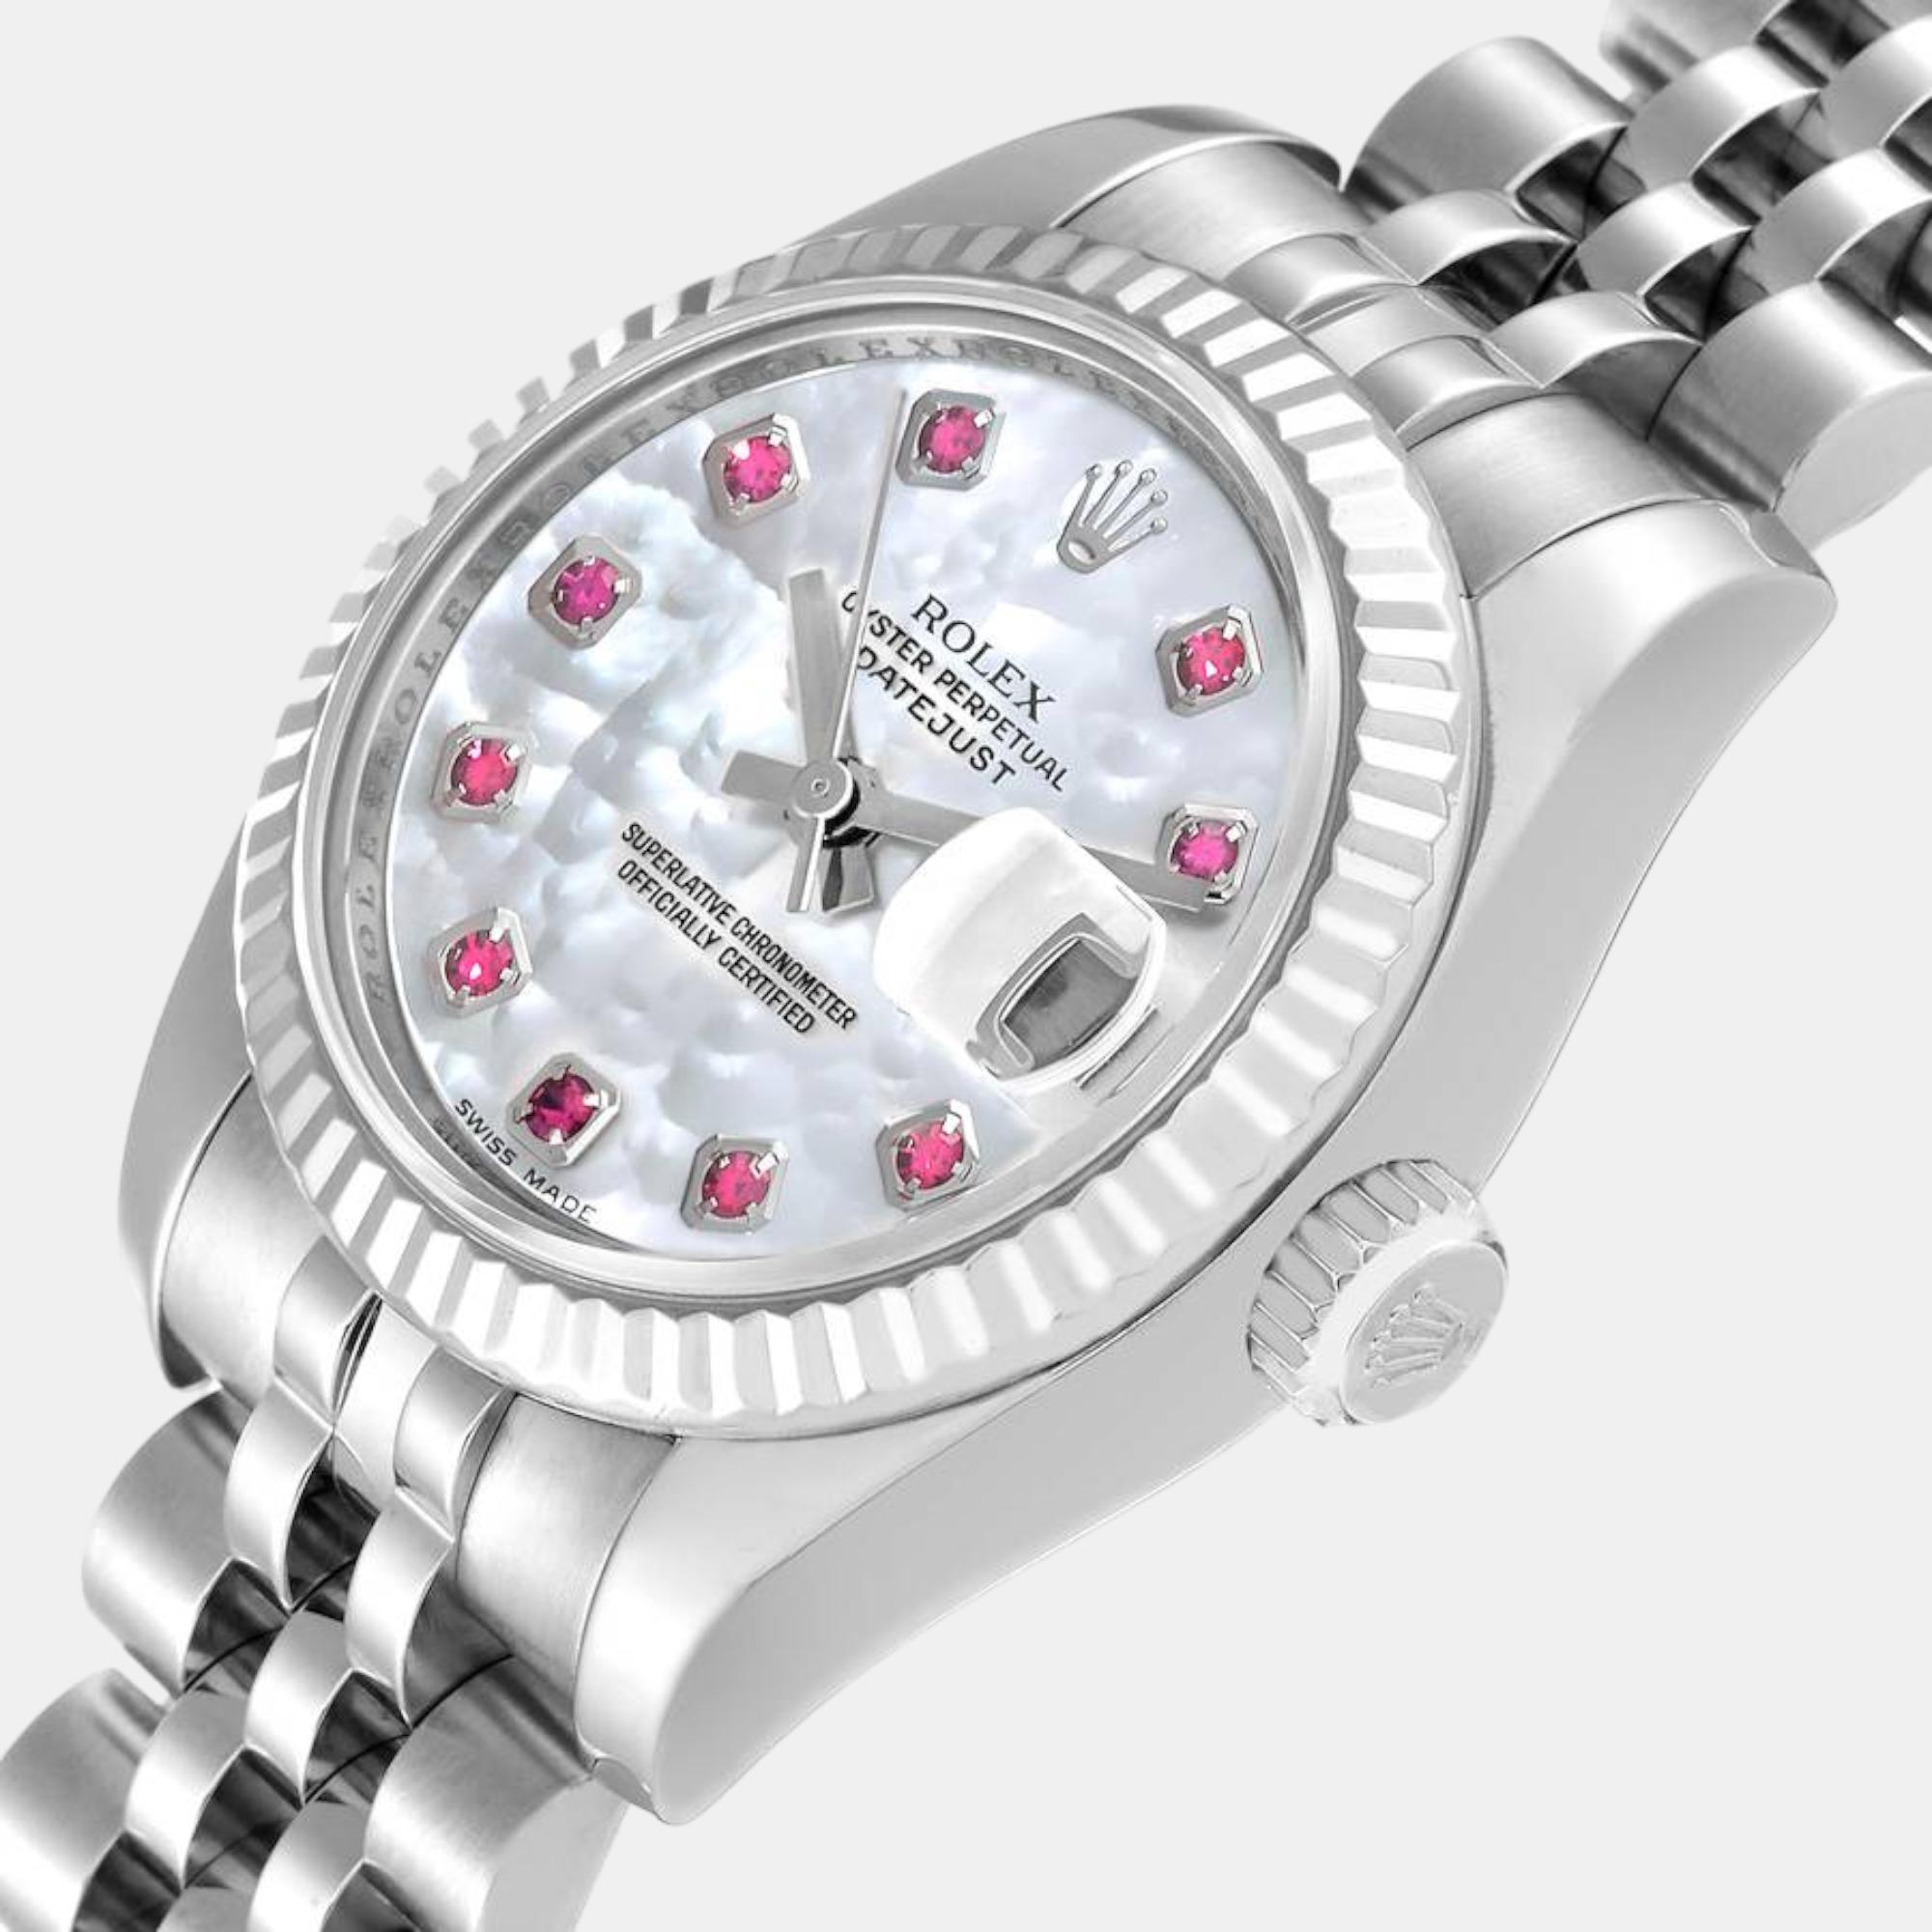 

Rolex Datejust Steel White Gold Mother of Pearl Ruby Dial Ladies Watch 179174 26 mm, Silver